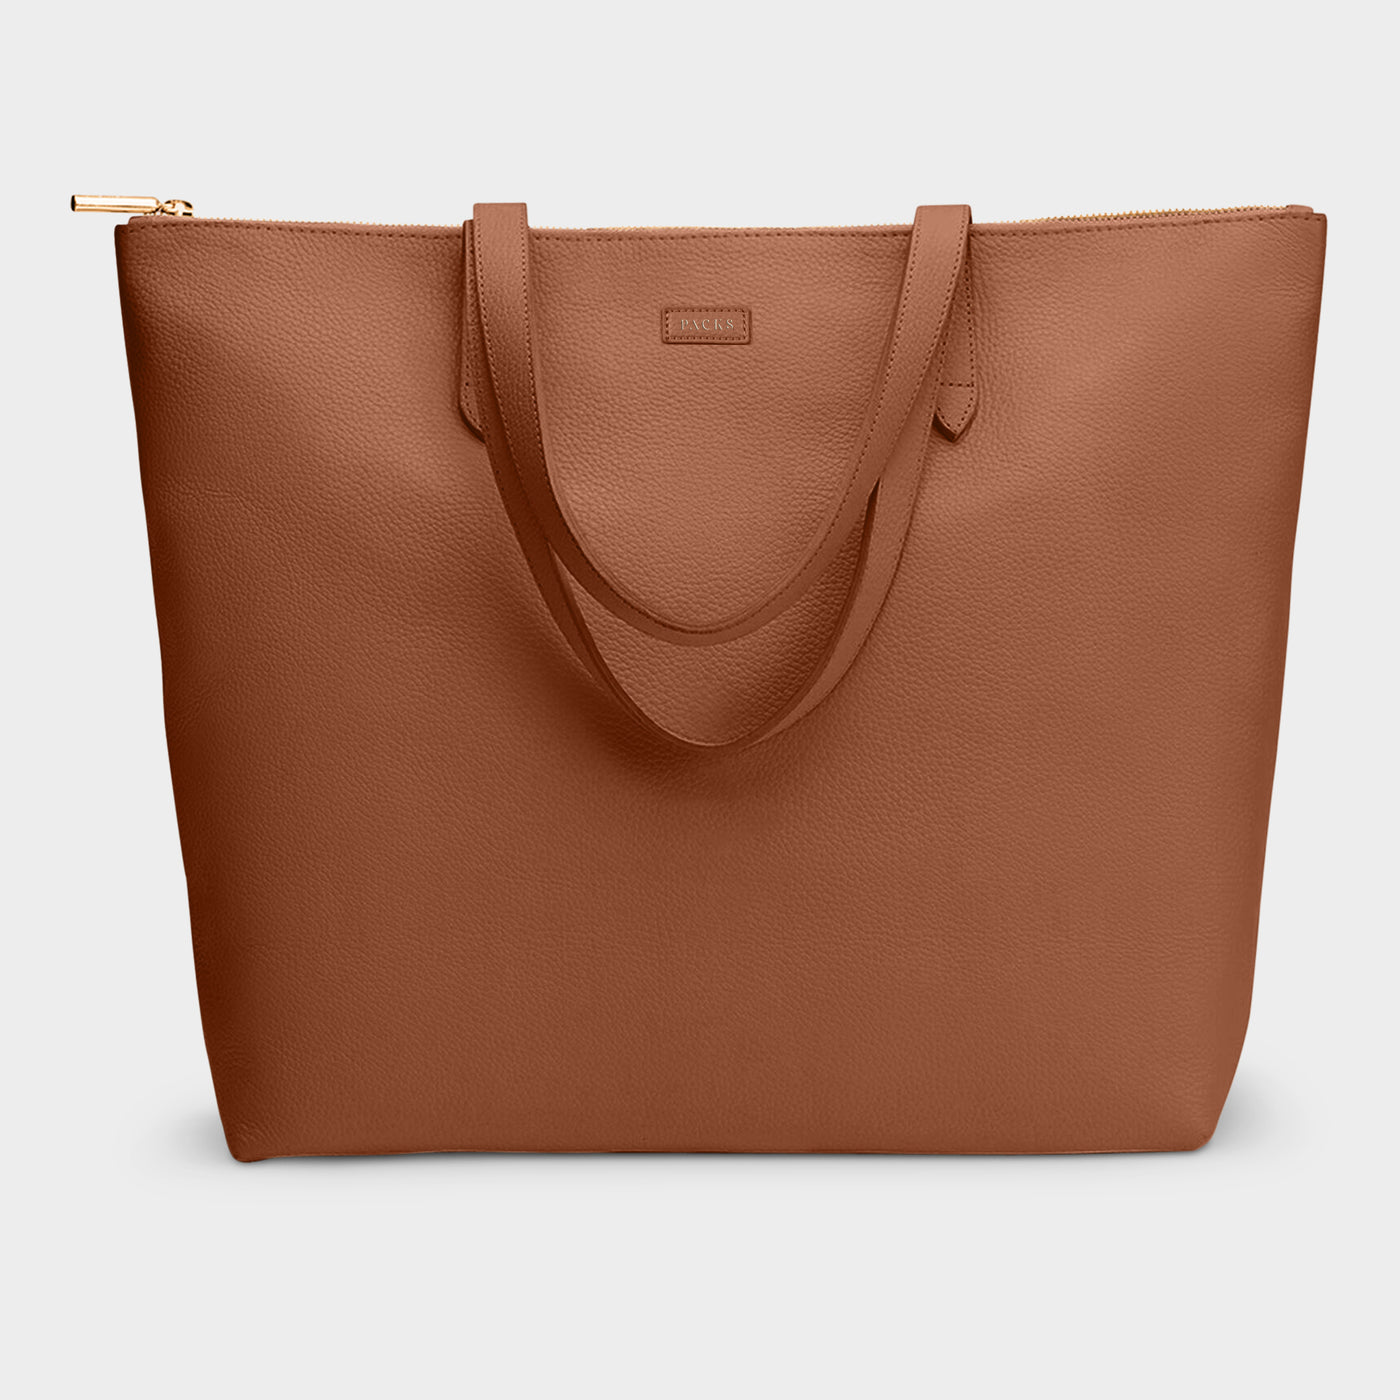 Vegan leather bags to shop now: Staud, Lambert, Free People, and more -  Reviewed